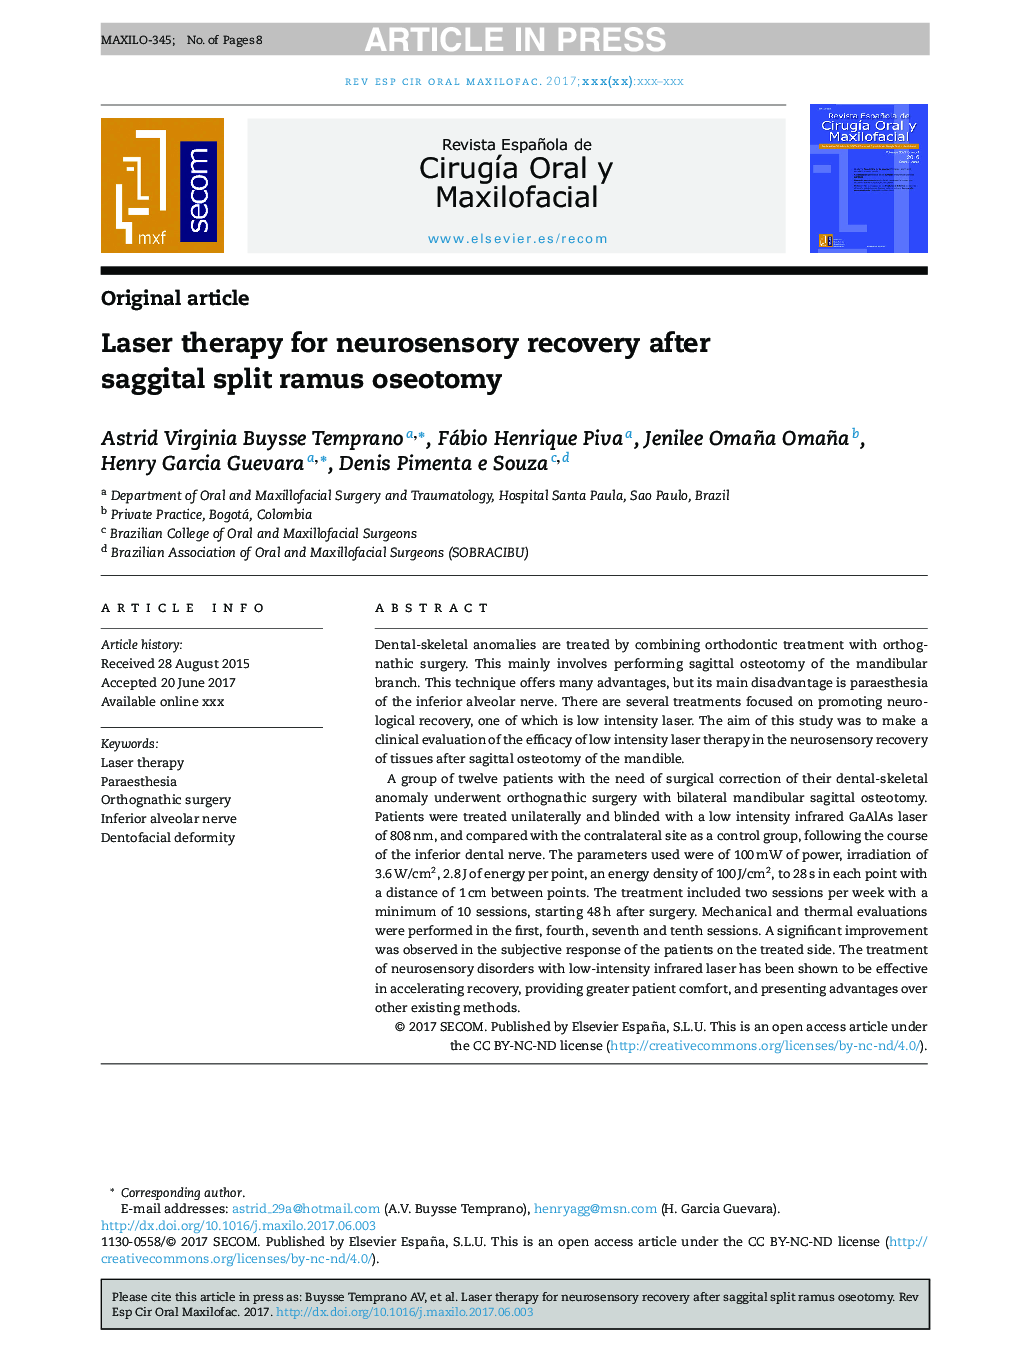 Laser therapy for neurosensory recovery after saggital split ramus oseotomy